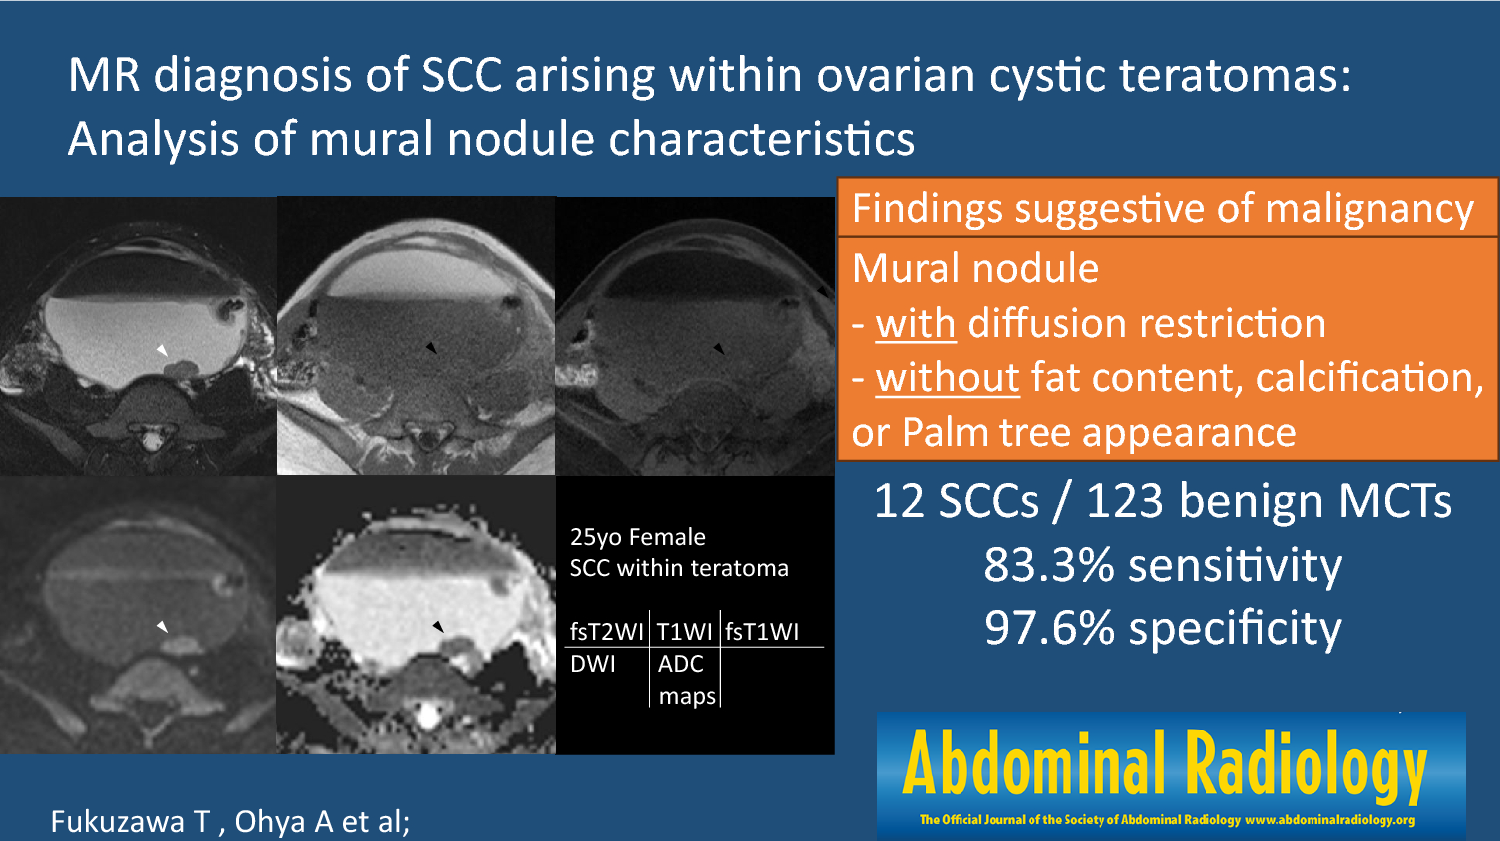 MR diagnosis of SCC arising within ovarian cystic teratomas: analysis of mural nodule characteristics